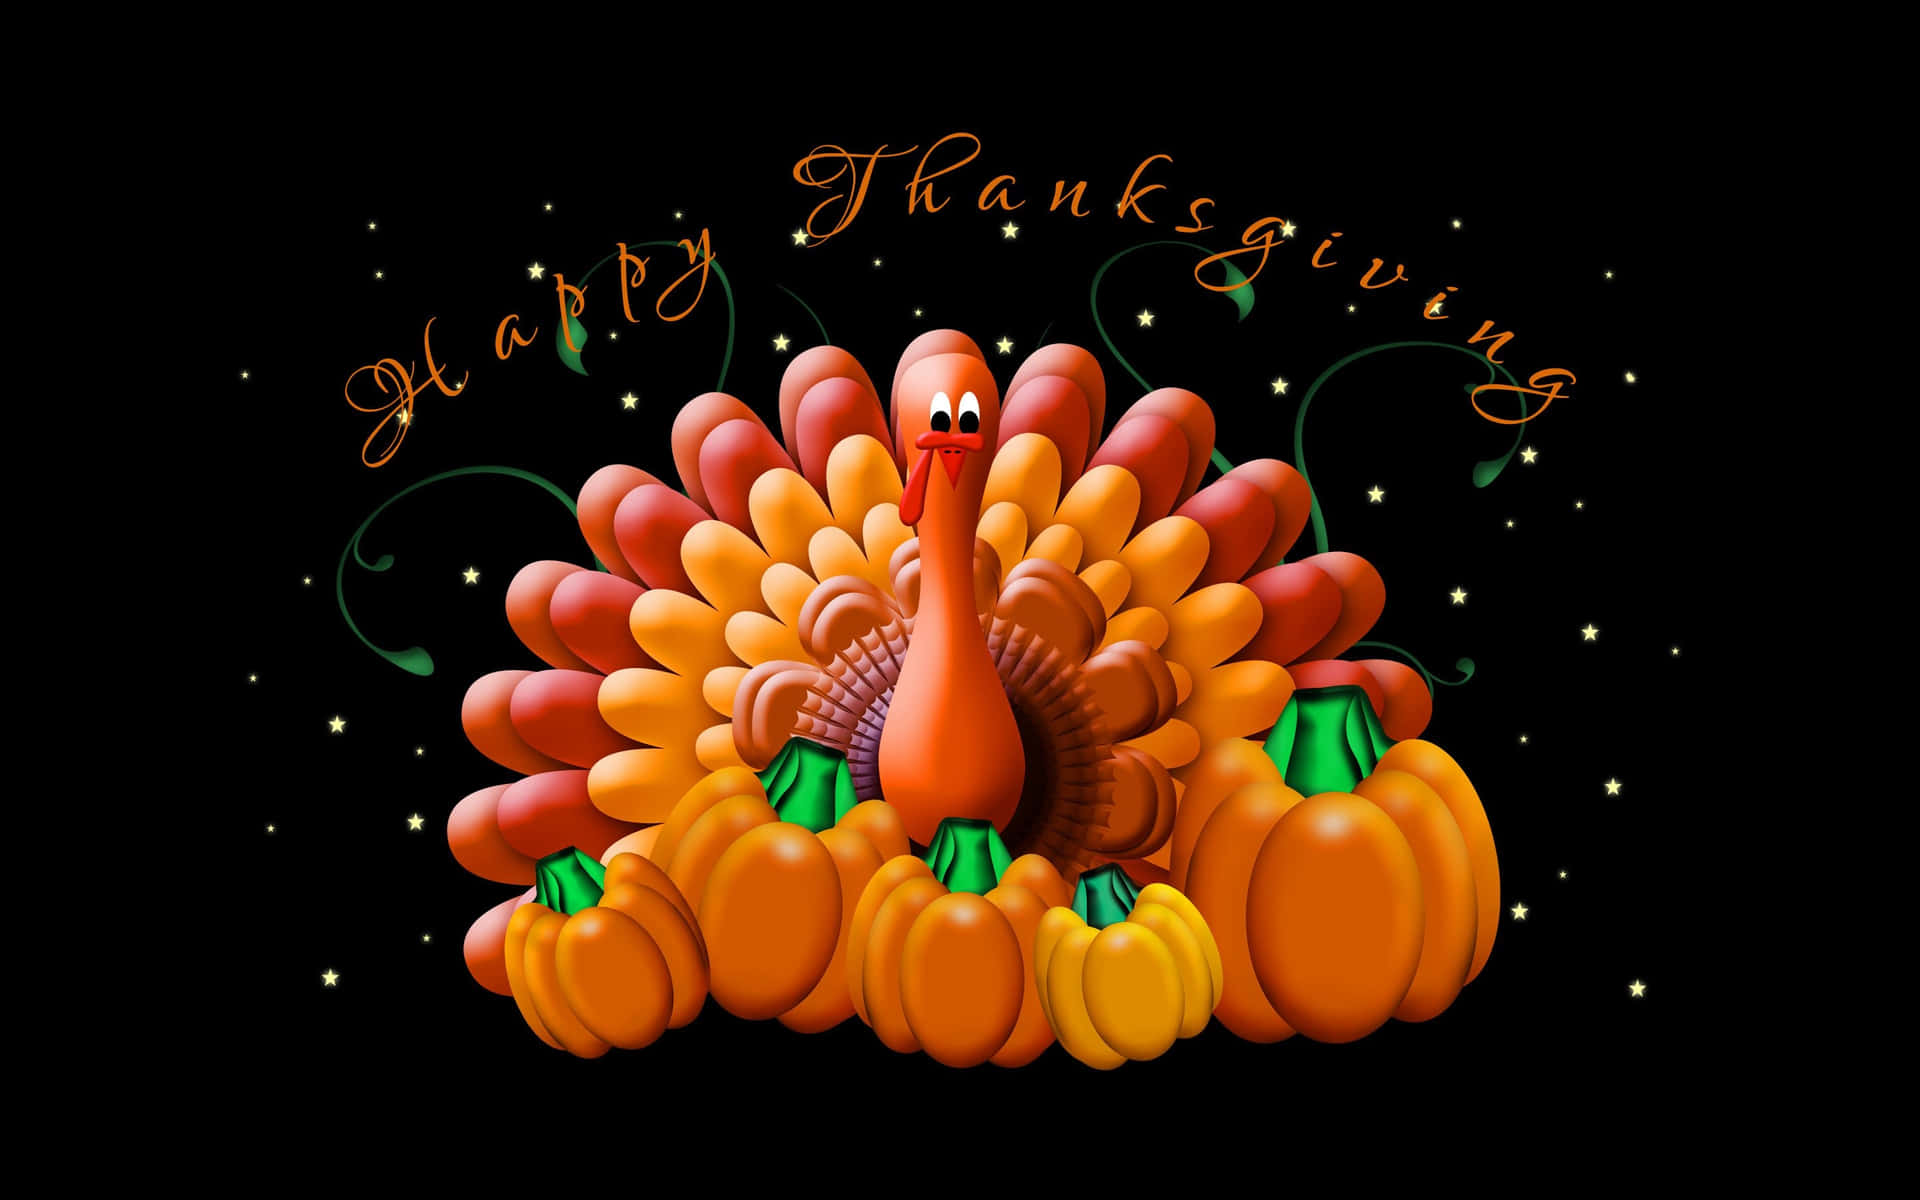 Happy Thanksgiving Animated Turkey With Pumpkins Wallpaper